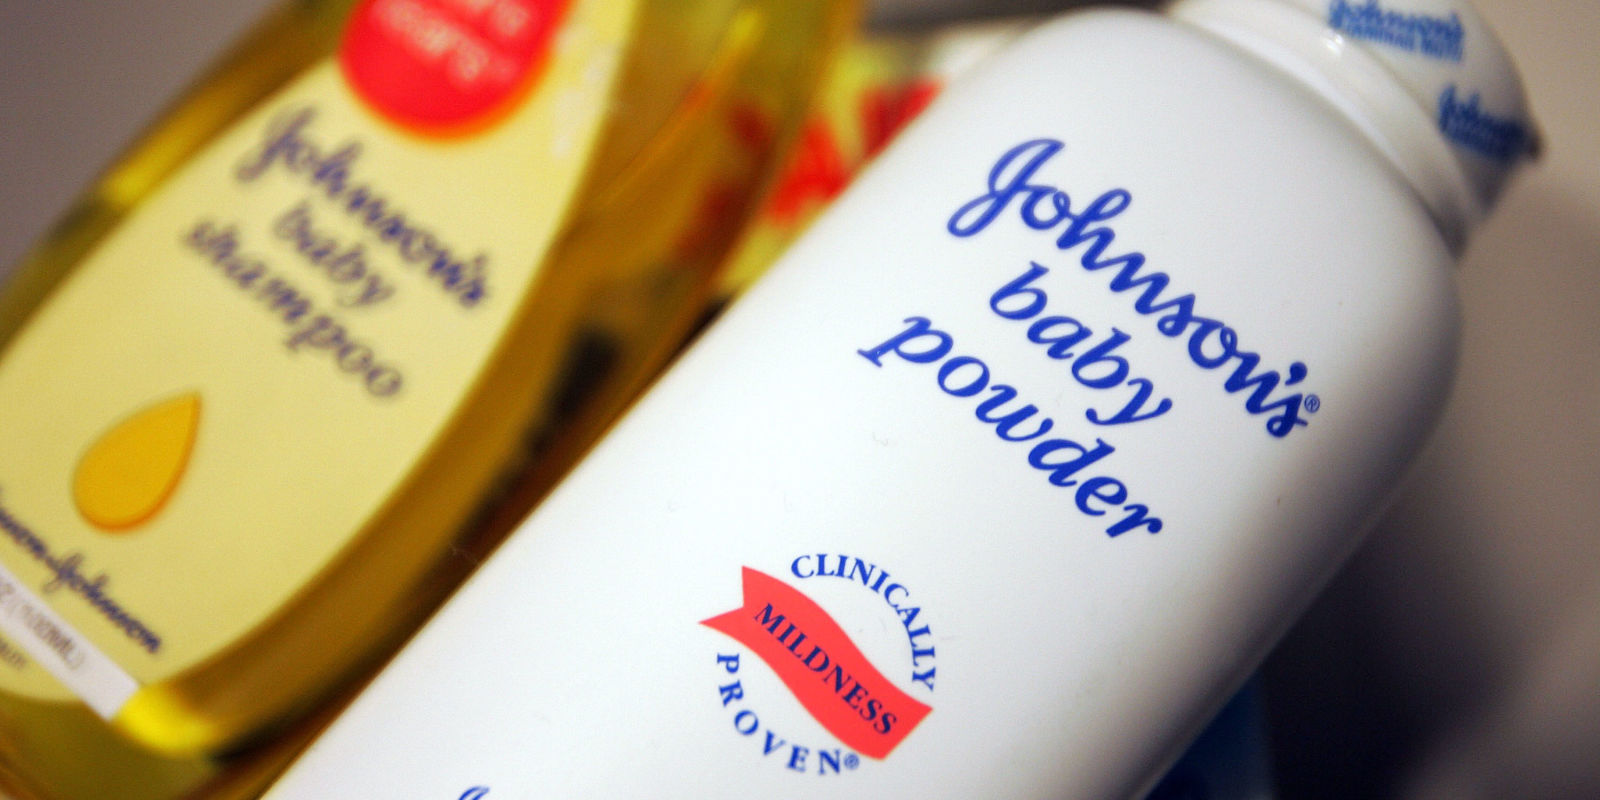 Johnson & Johnson Ordered to Pay $417 Million in Cancer Lawsuit